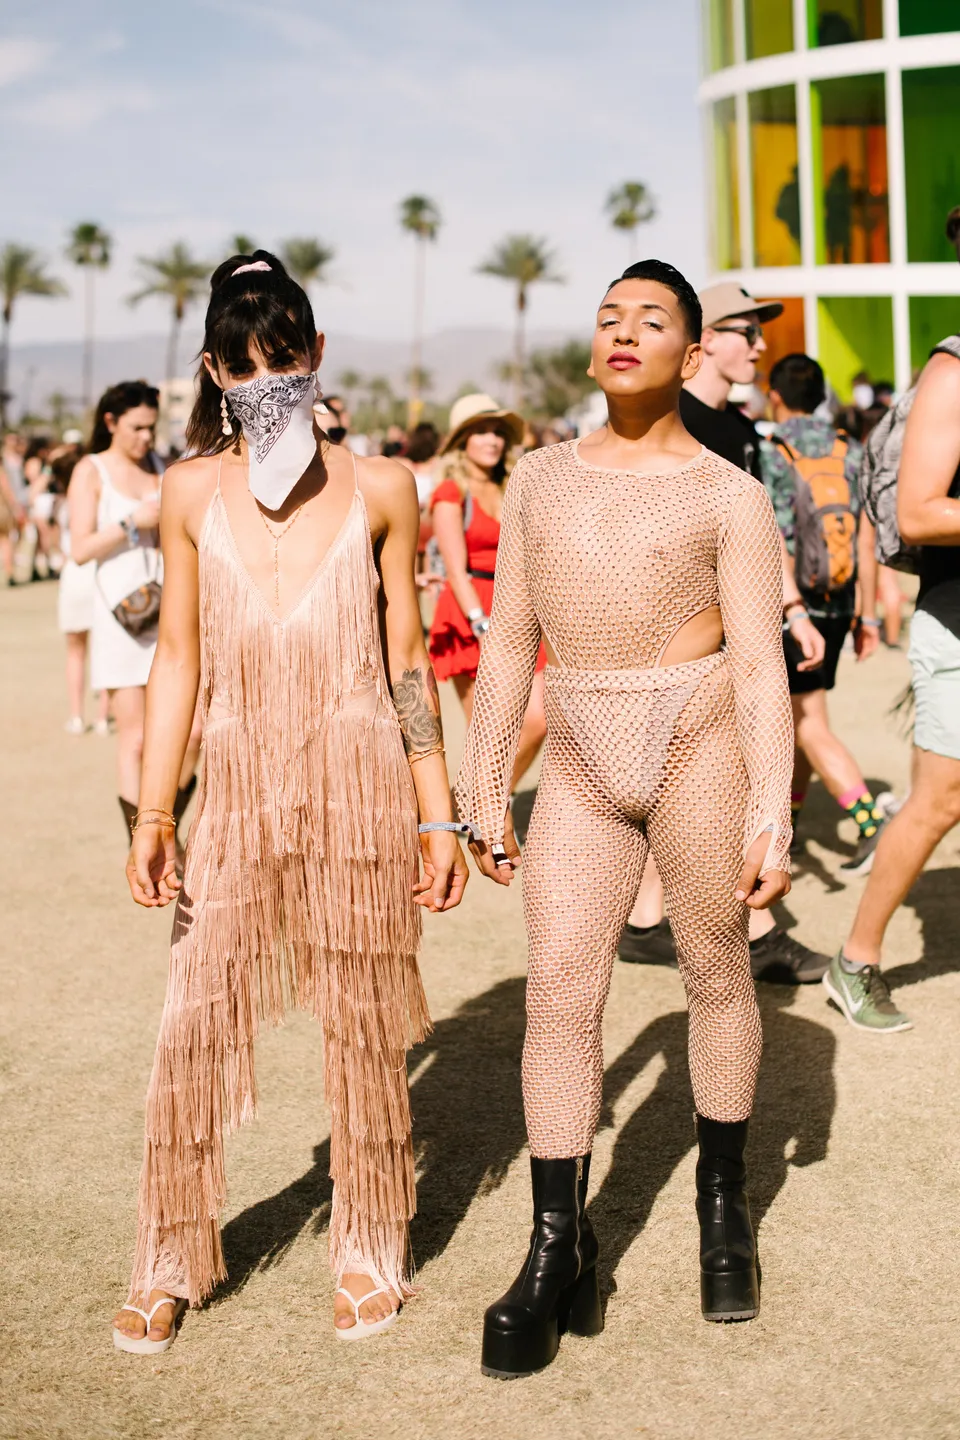 The Best Outfits Of Coachella 2019 - The Odyssey Online